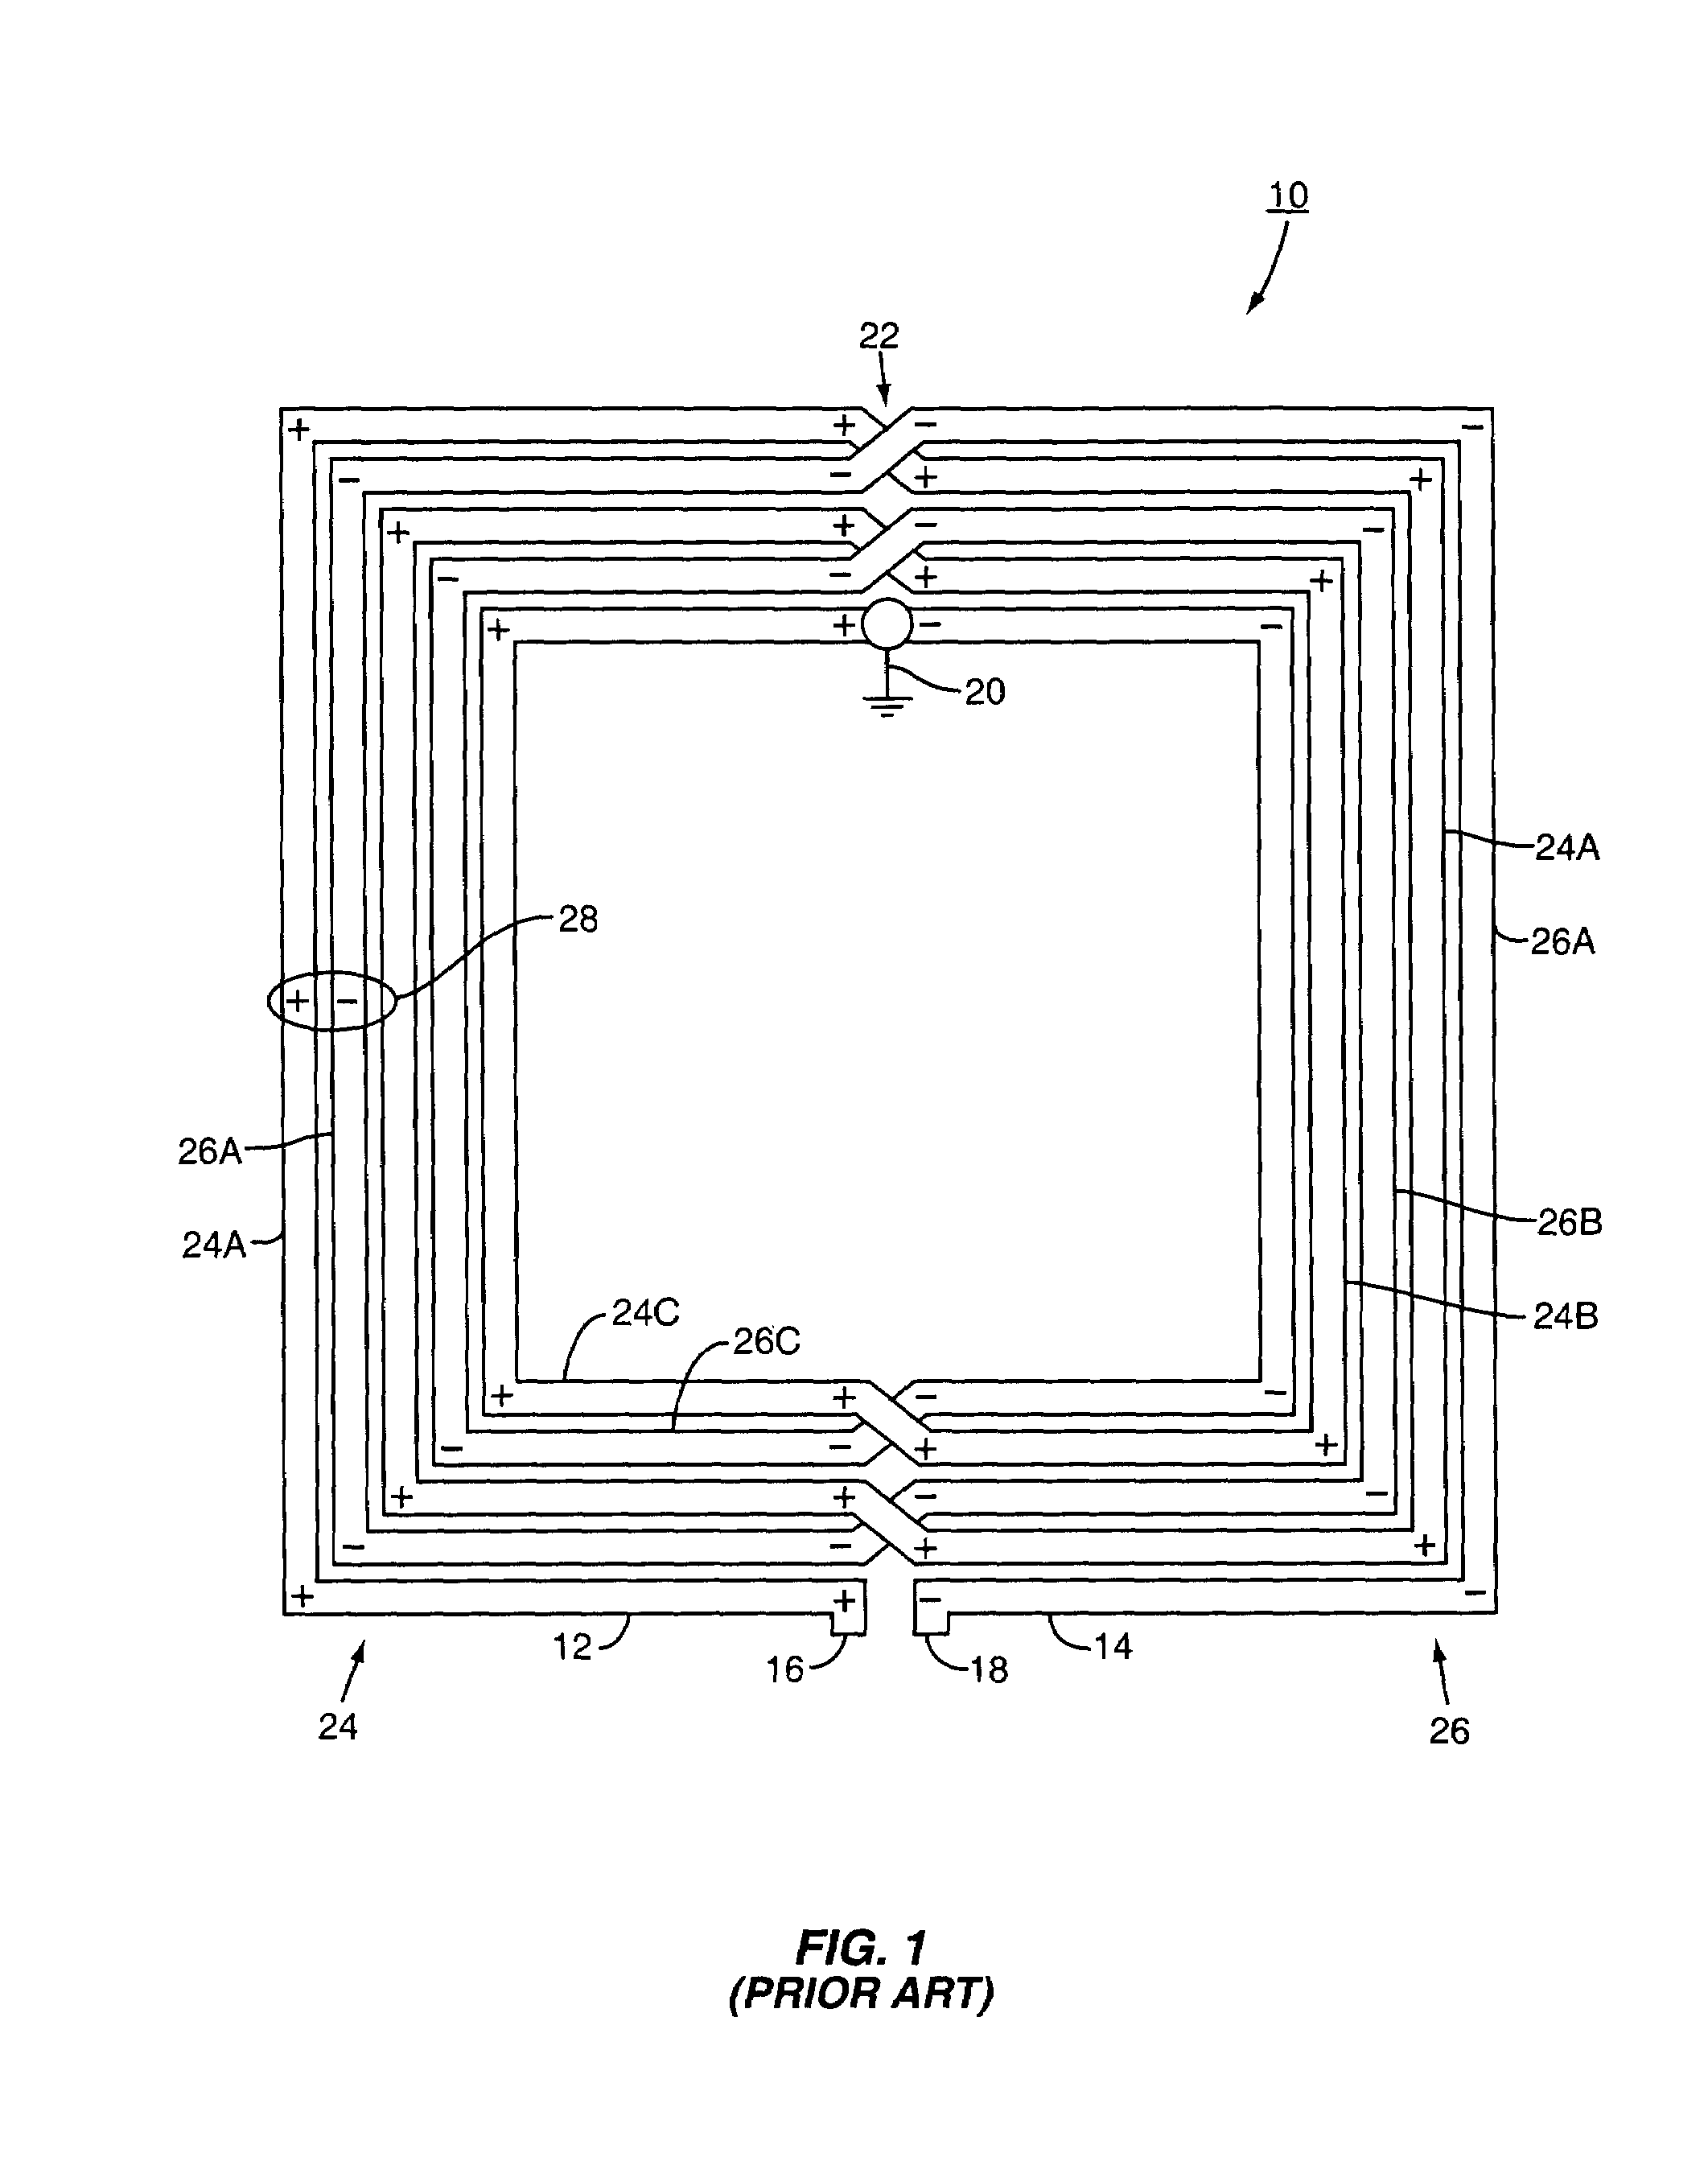 Differential inductor design for high self-resonance frequency